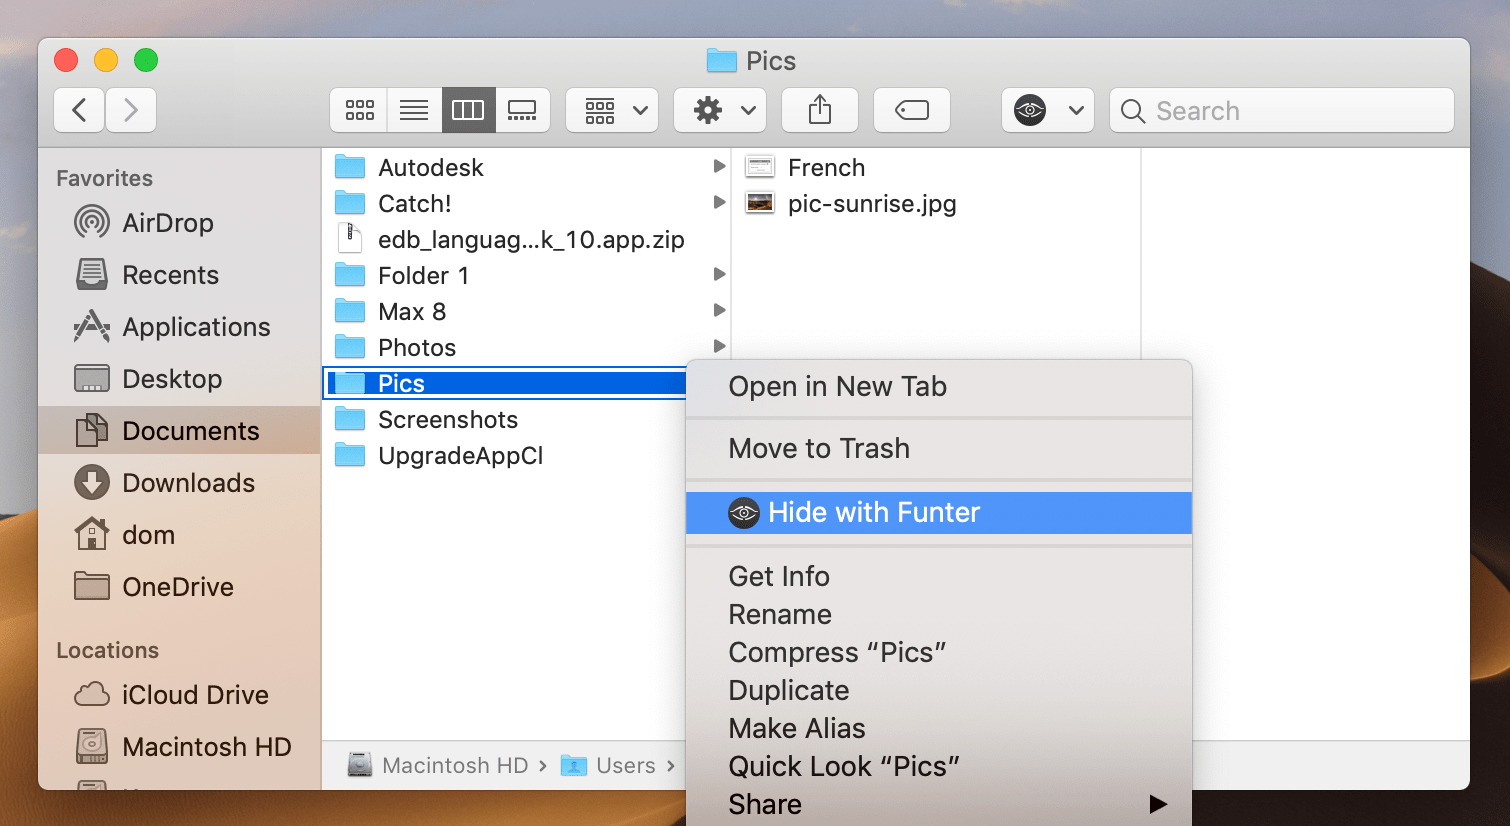 Hide with Funter context menu command selected for folder